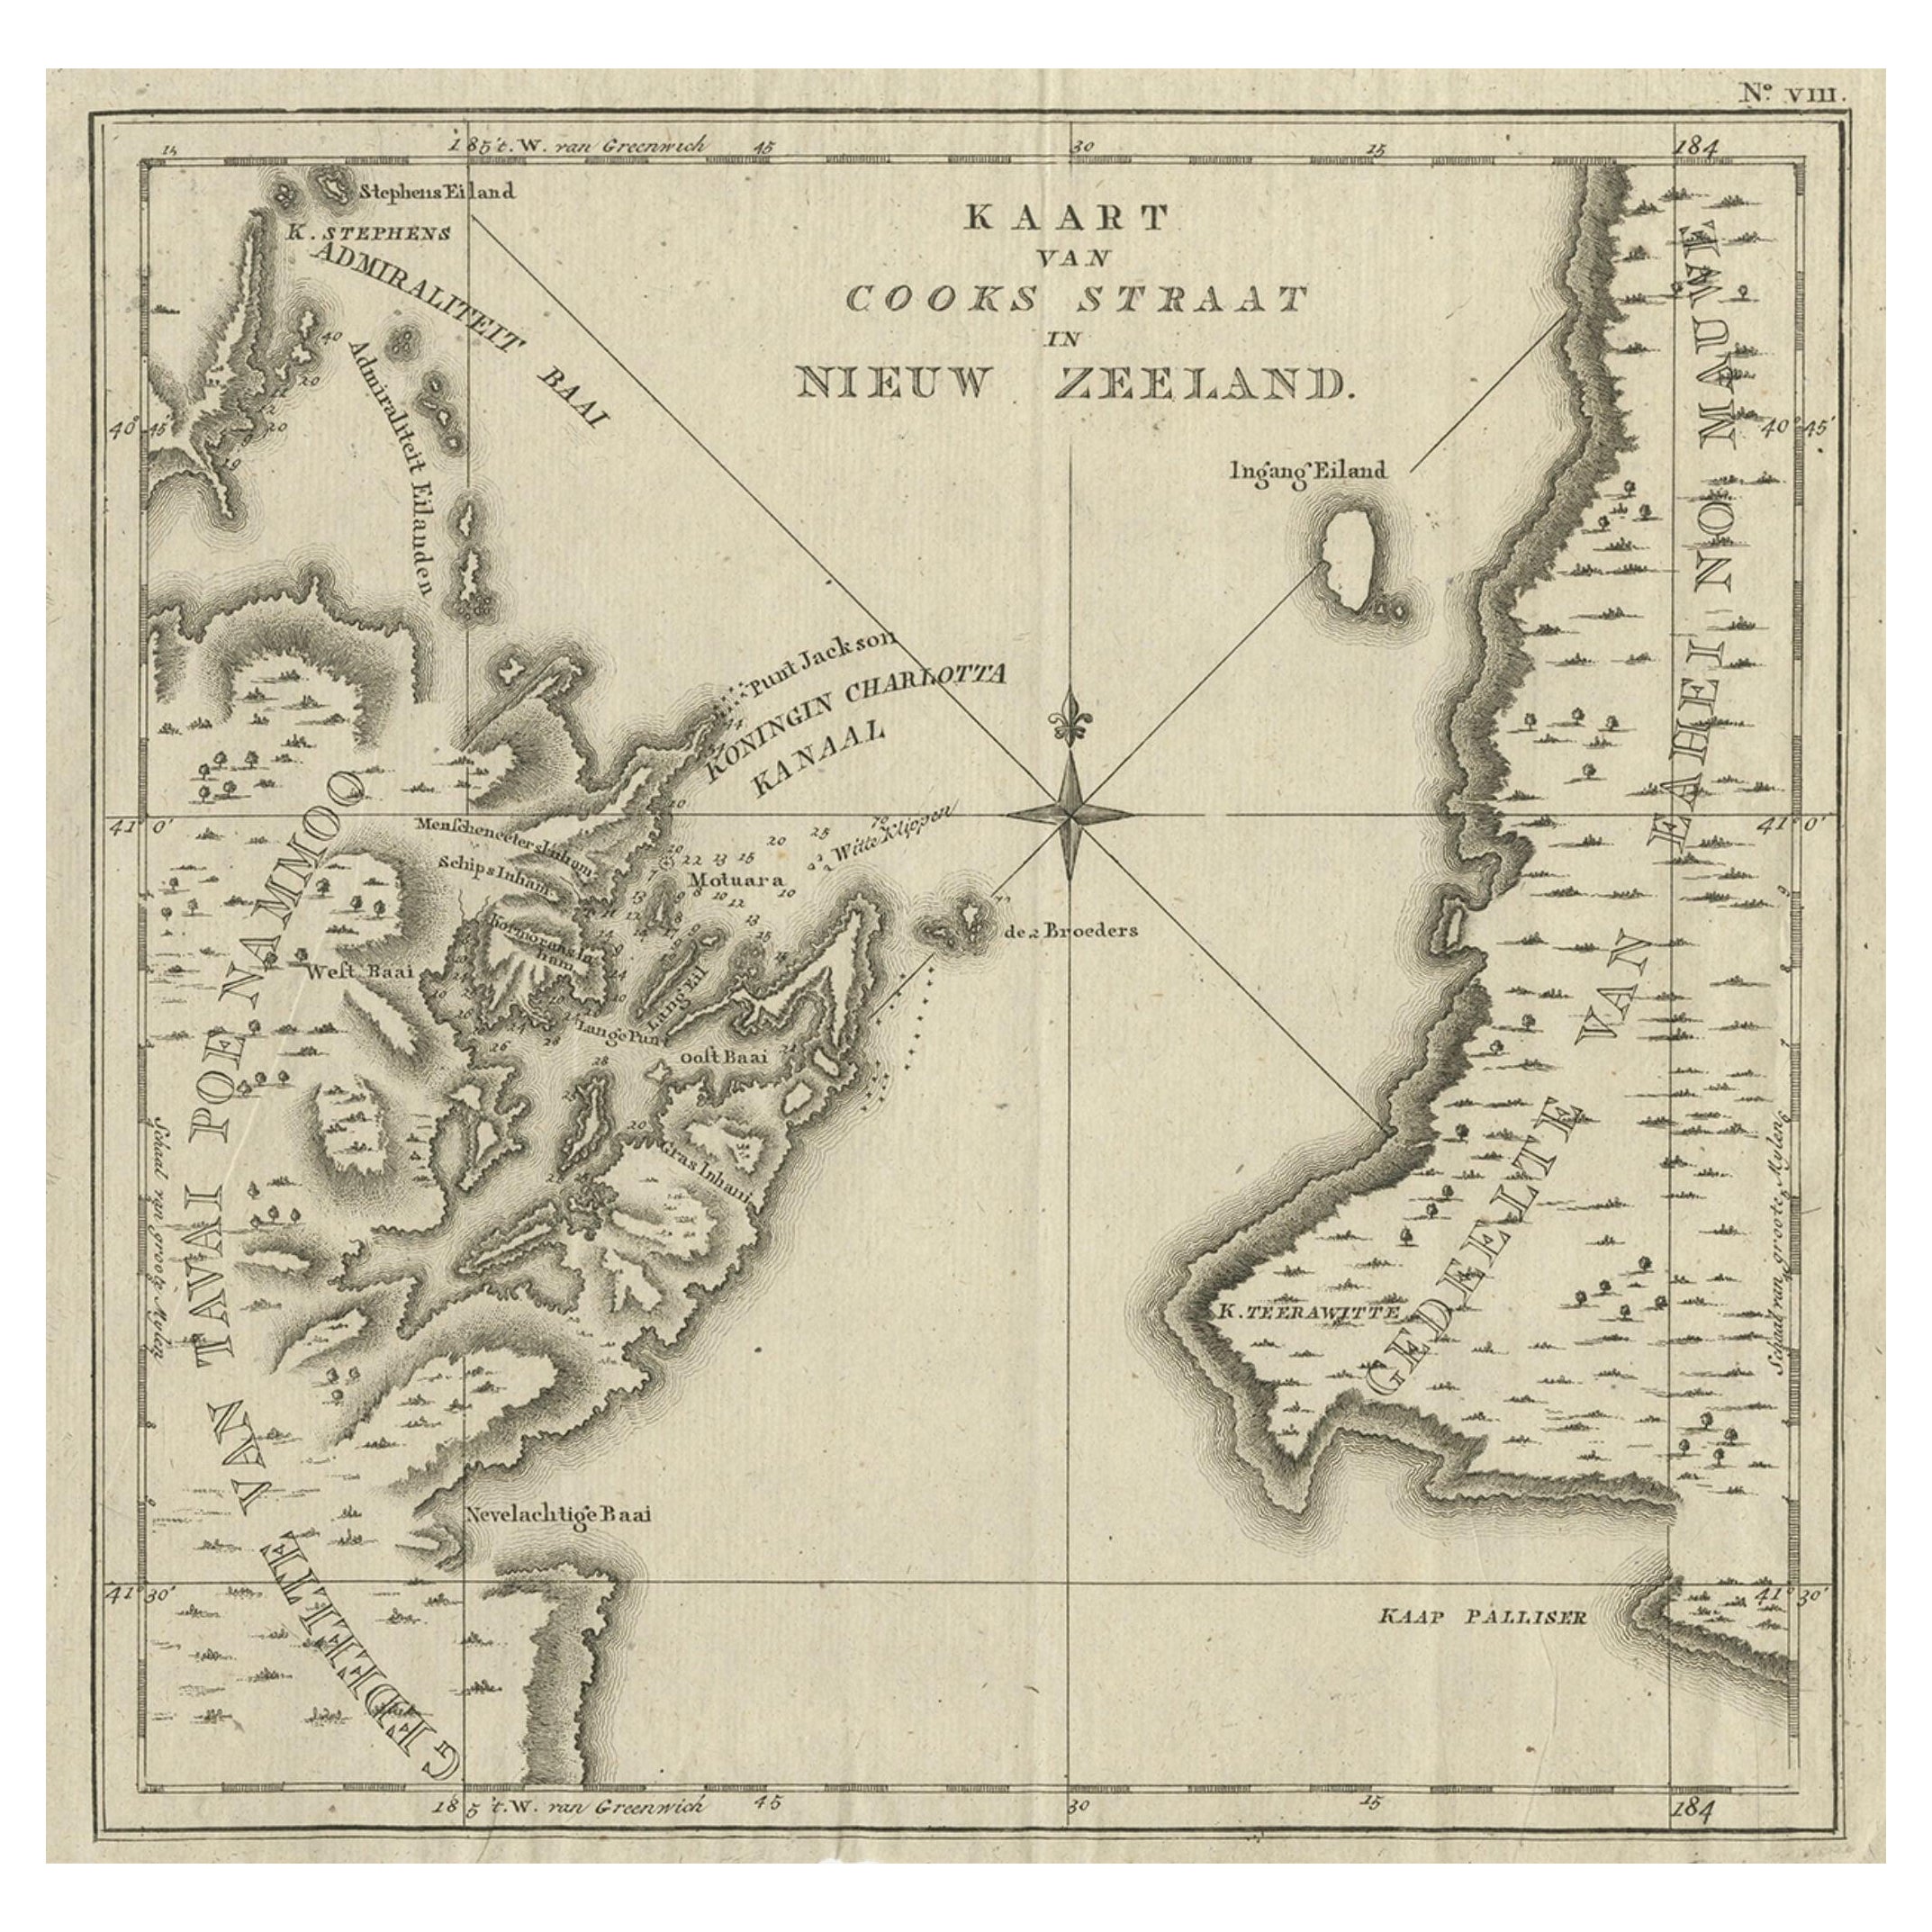 Antique Map of Cook's Strait in New Zealand, 1803